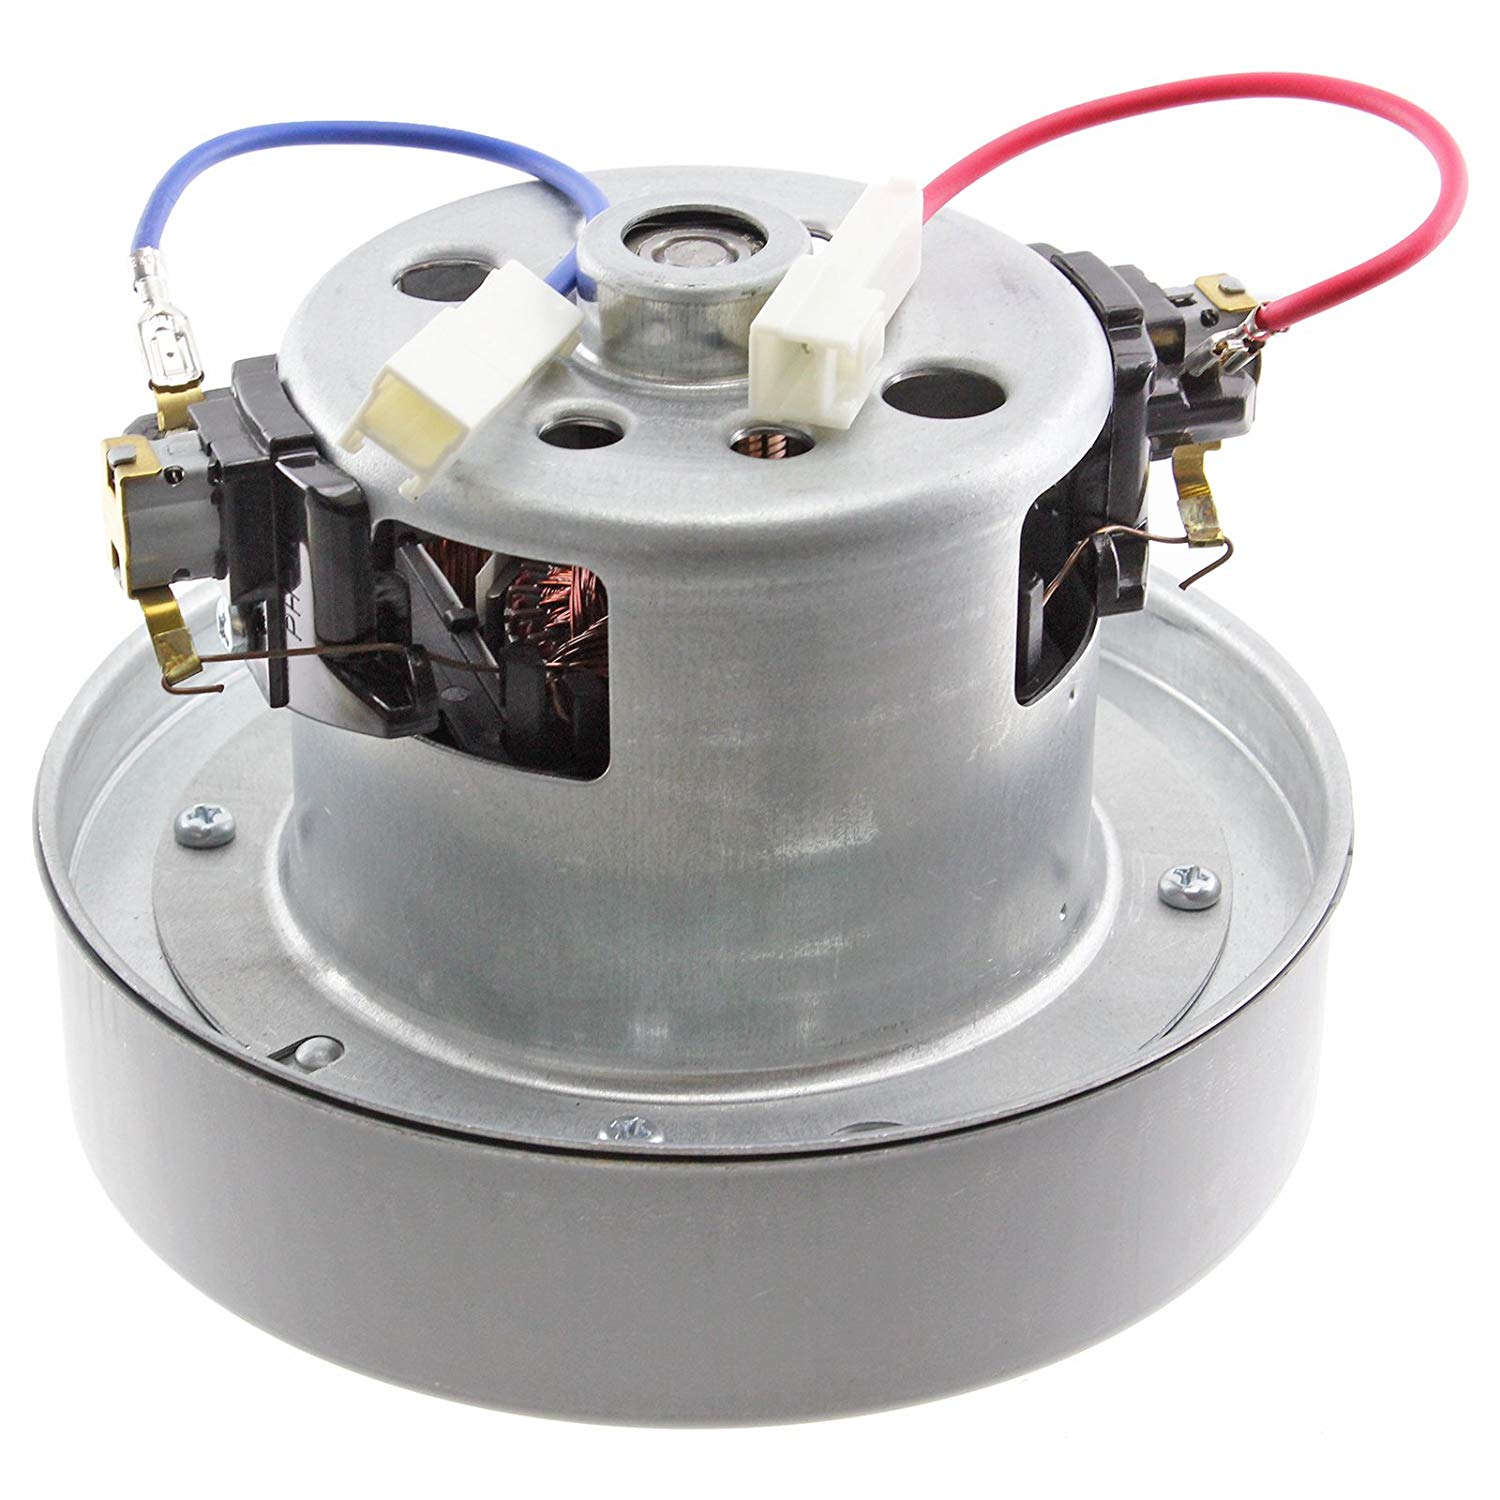 Complete Motor Unit for DYSON DC05 DC08 DC11 DC19 DC20 DC21 DC29 Vacuum Cleaner (YV2 1600 YDK Type 240V + TOC)